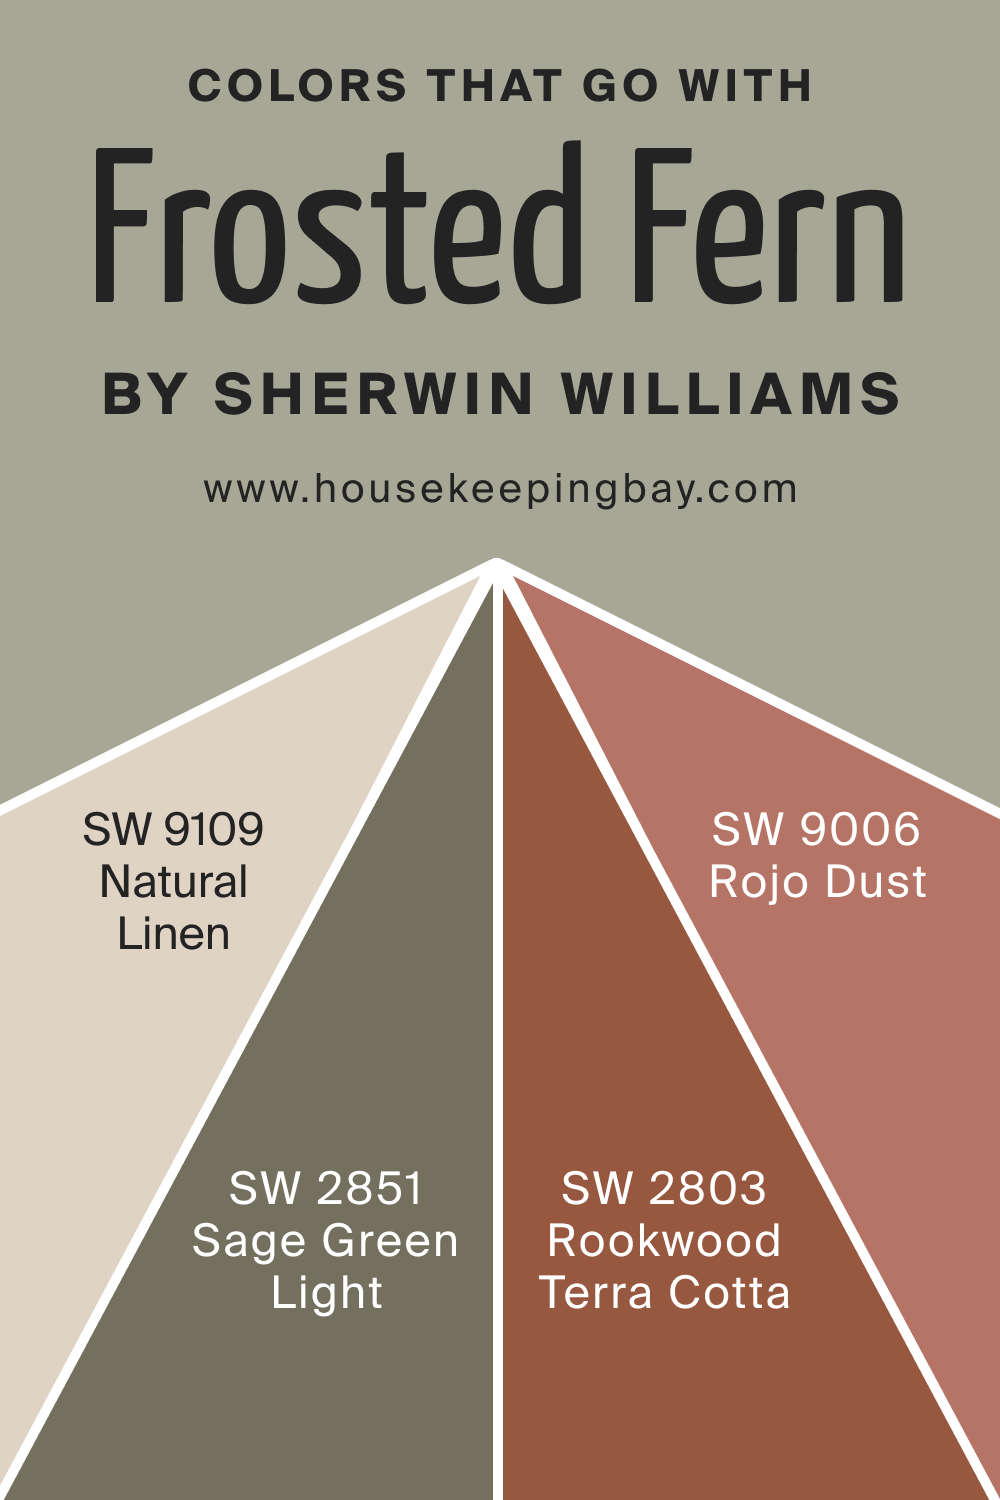 Colors that goes with SW 9648 Frosted Fern by Sherwin Williams